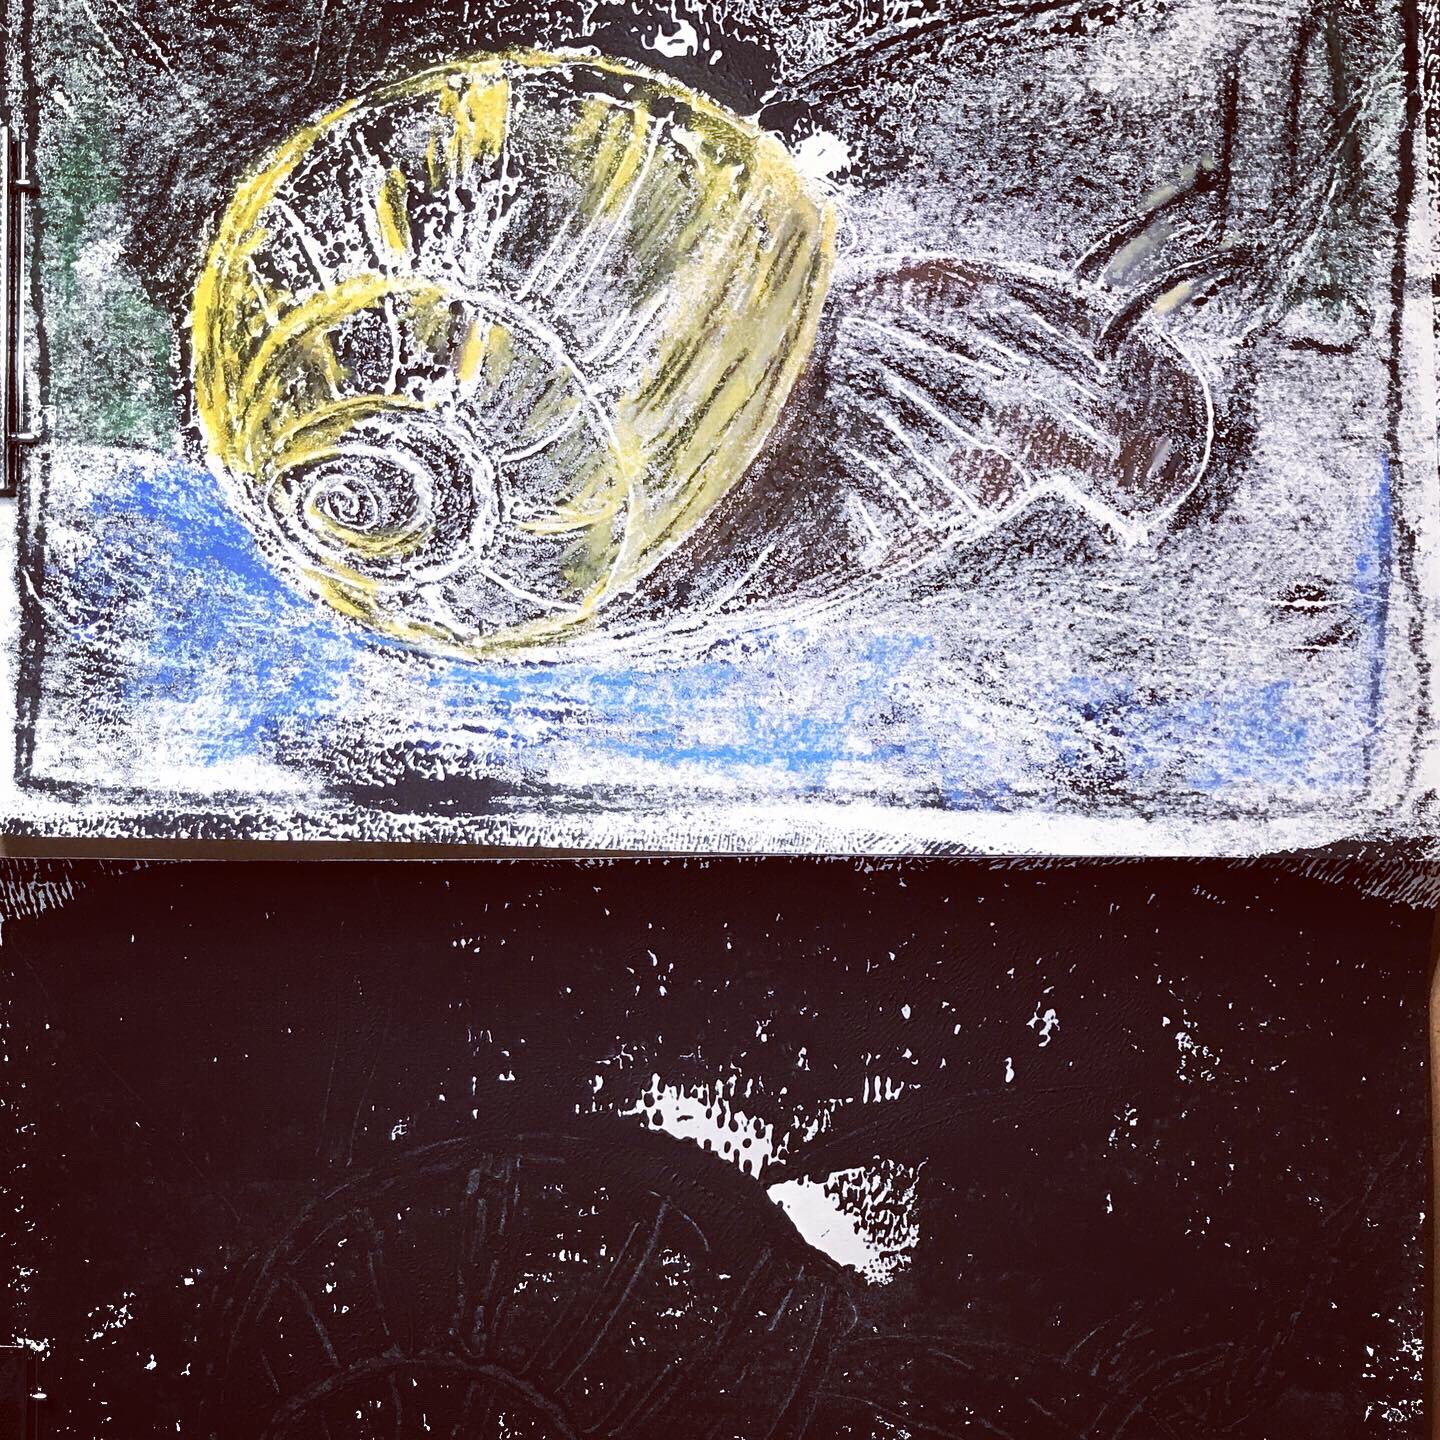 Monotype of a snail